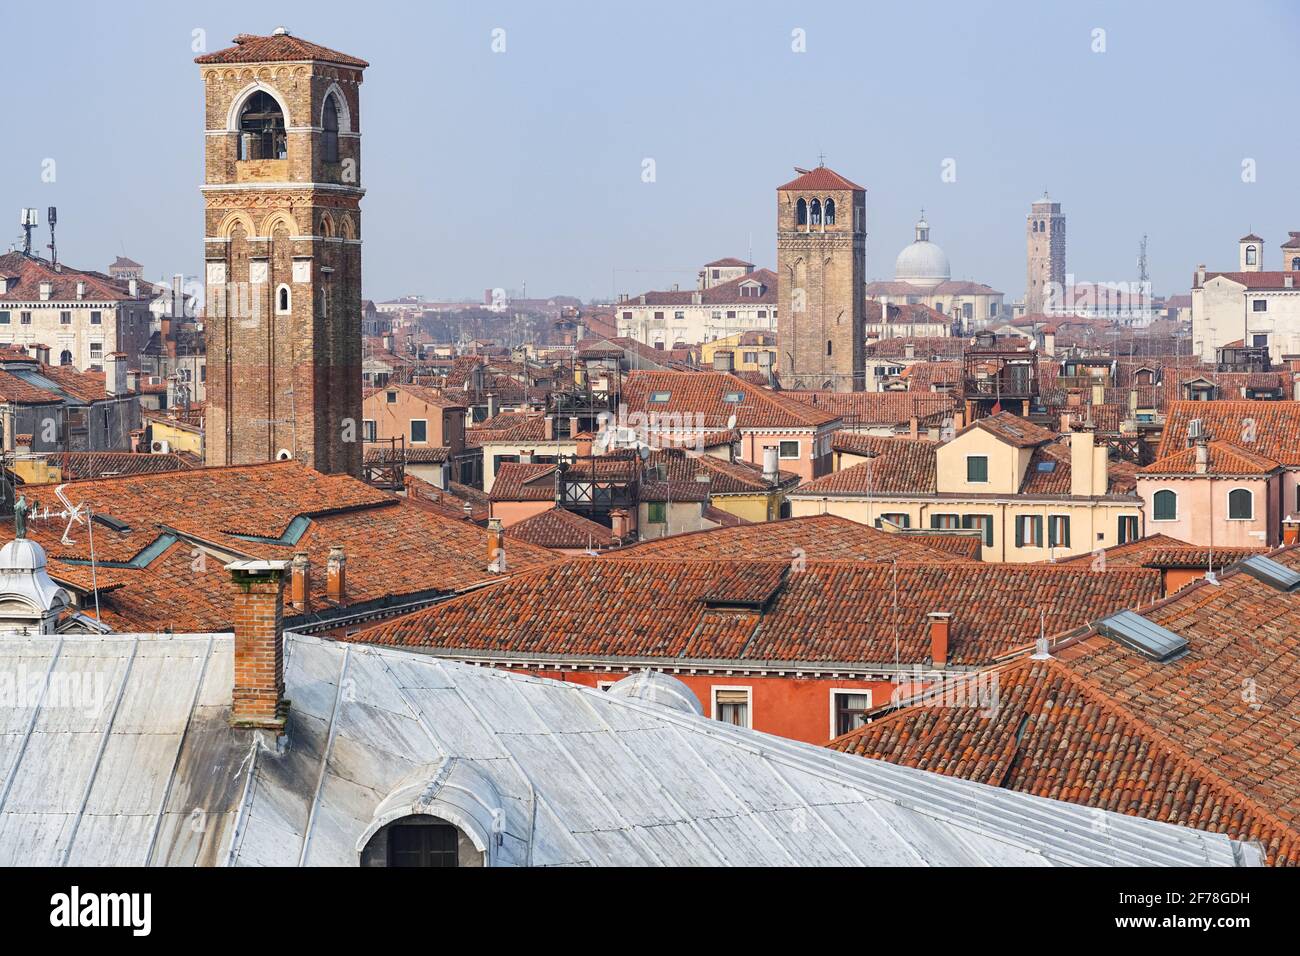 View of red tiled rooftops in Venice, Italy, Stock Photo